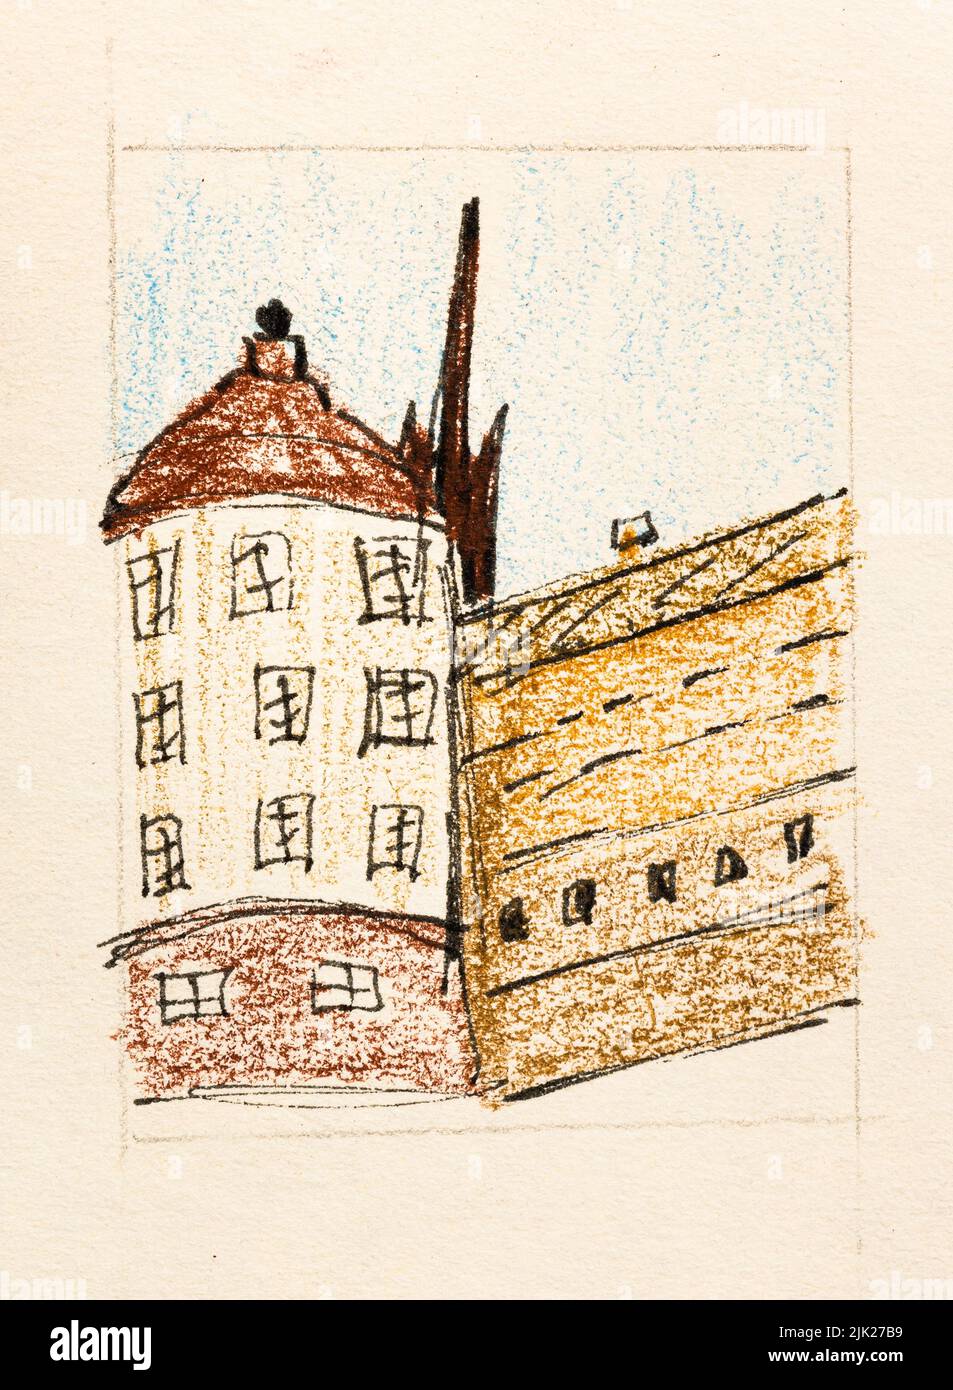 sketch of building in Nantes city France hand-drawn with color pencils and black pen on old yellow colored textured paper close up Stock Photo